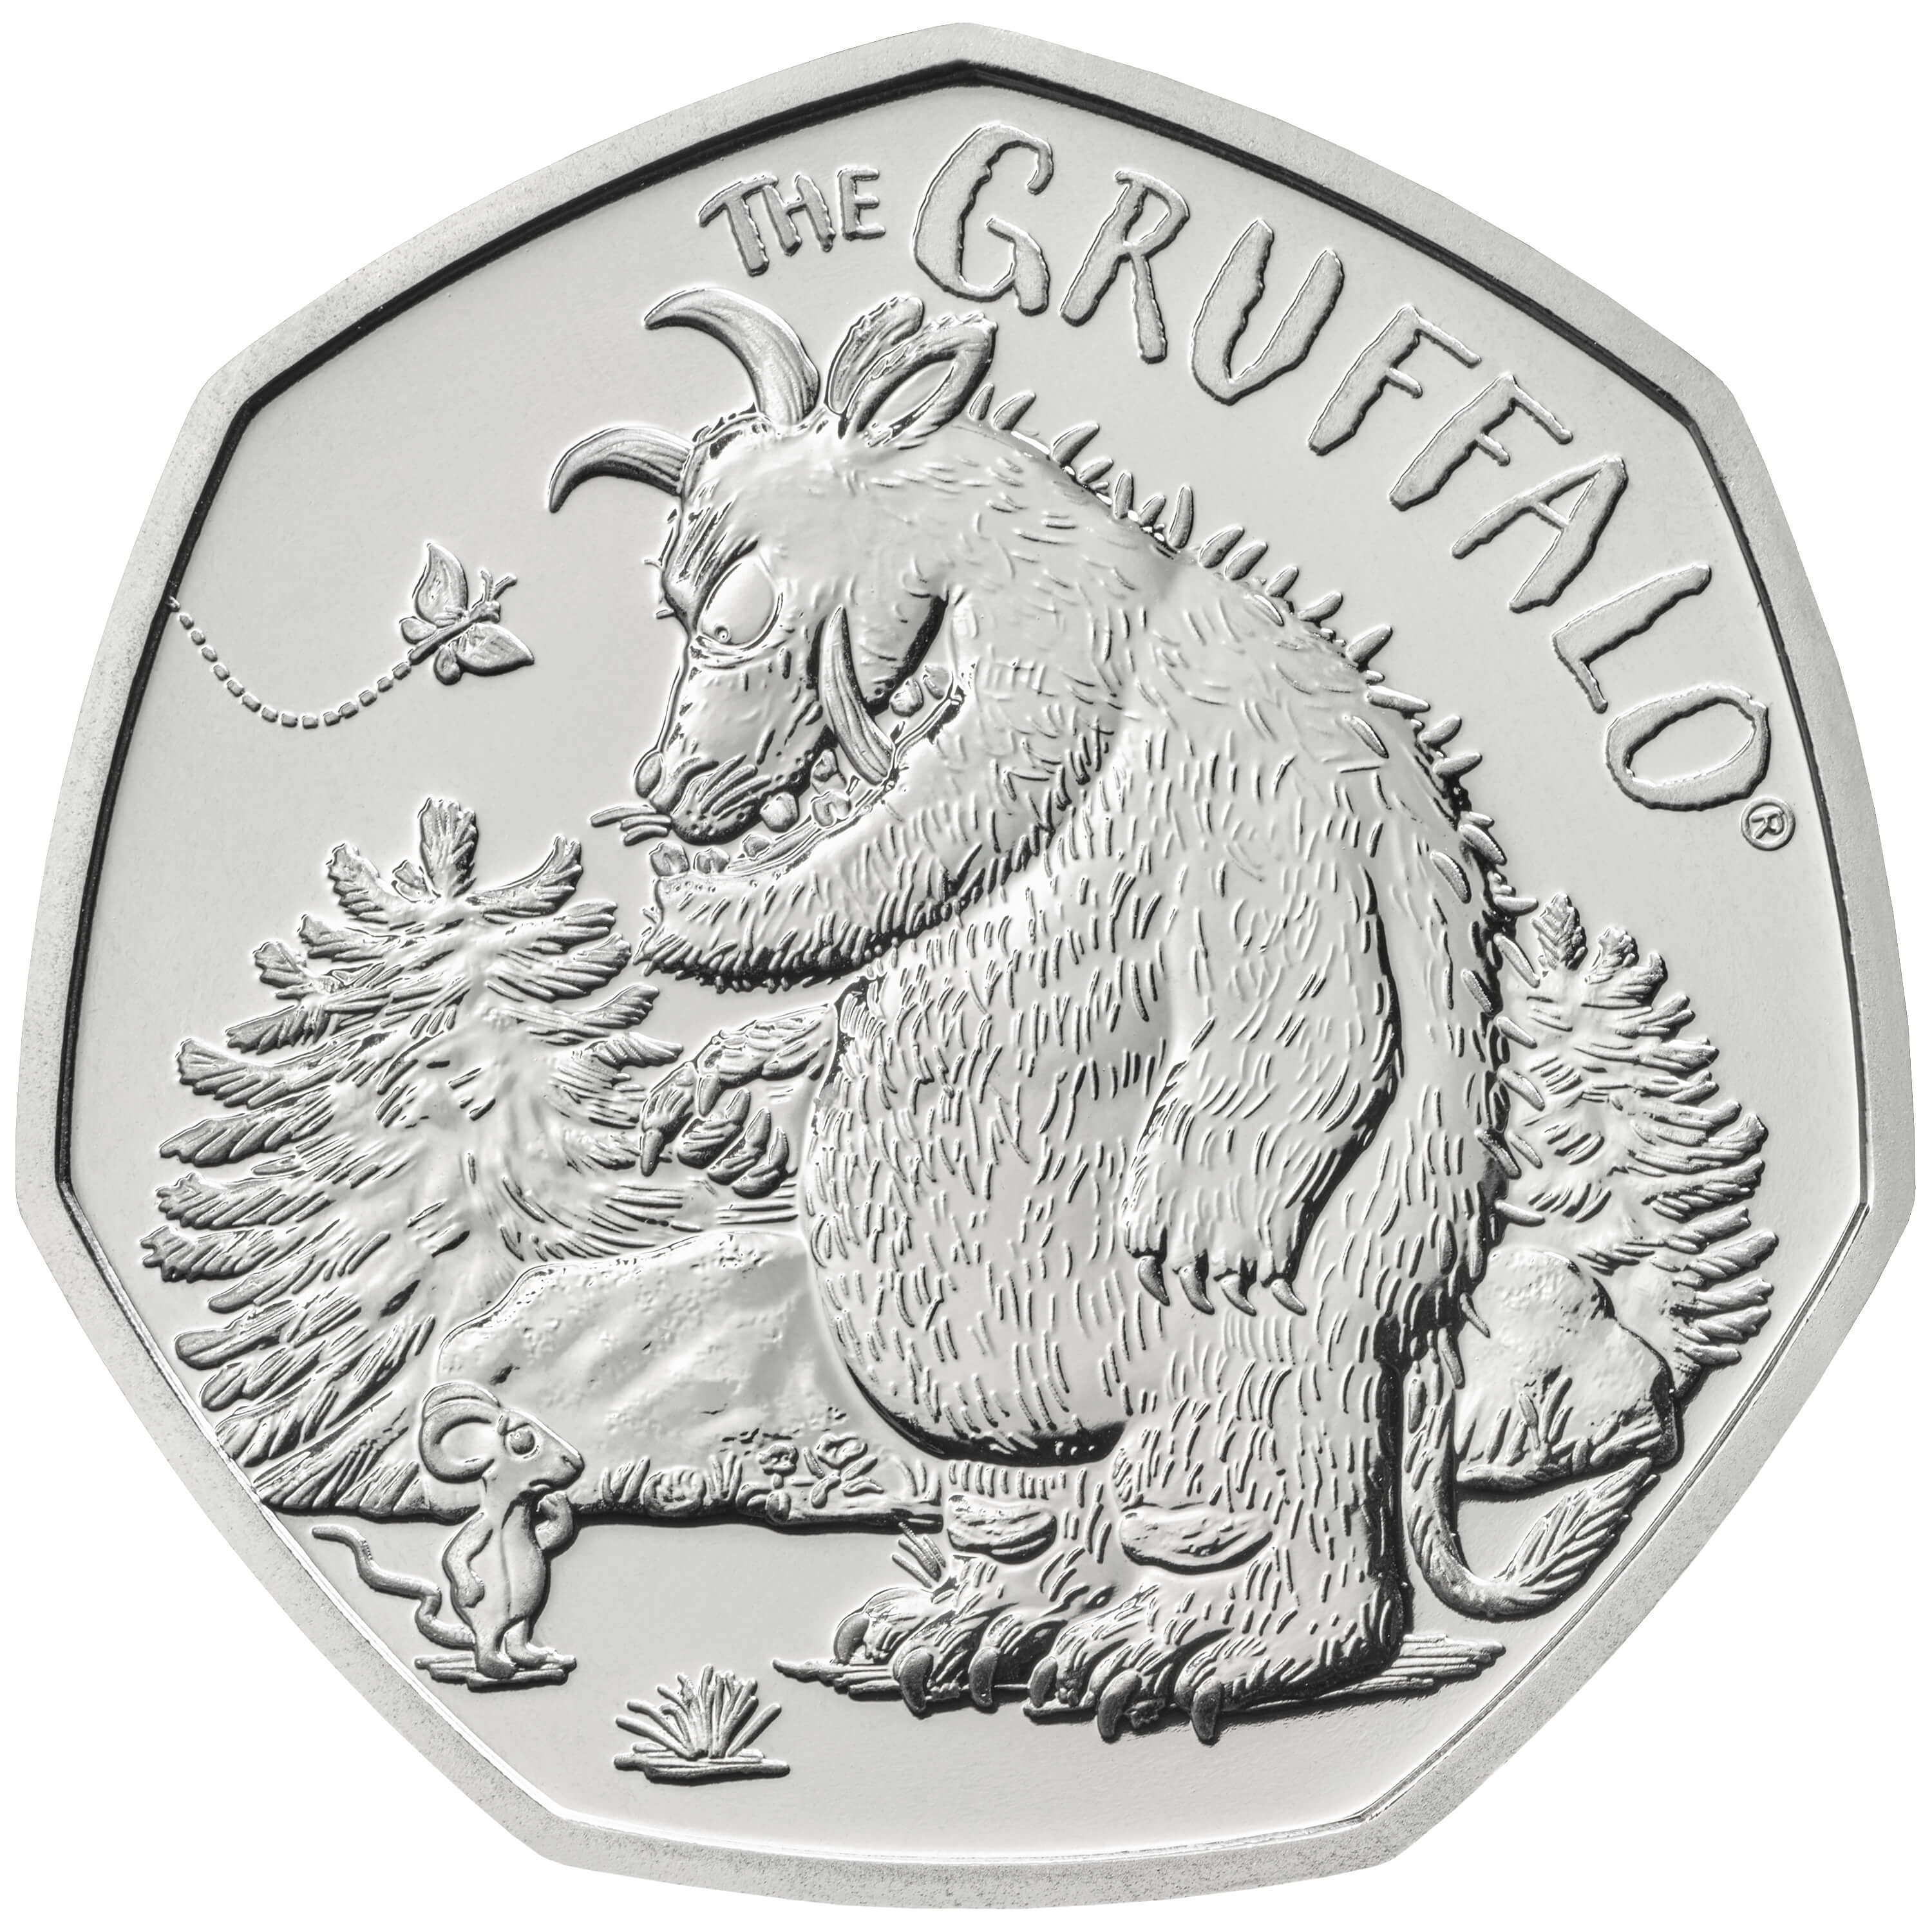 Details about   2019 The Gruffalo Colourized Silver Proof Royal Mint 50p Cased&Boxed With COA 